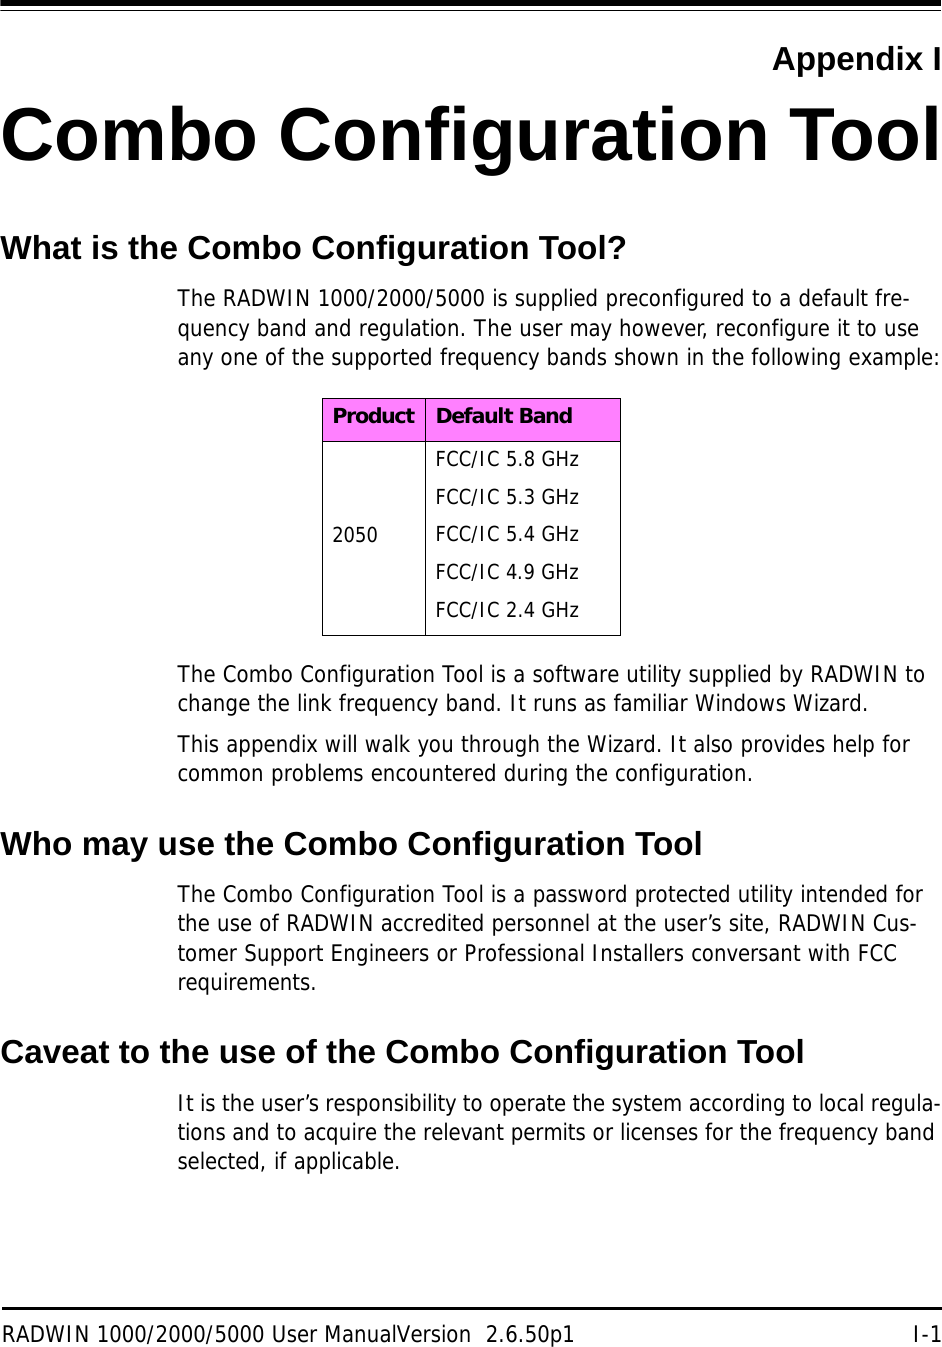 RADWIN 1000/2000/5000 User ManualVersion  2.6.50p1 I-1Appendix ICombo Configuration ToolWhat is the Combo Configuration Tool?The RADWIN 1000/2000/5000 is supplied preconfigured to a default fre-quency band and regulation. The user may however, reconfigure it to use any one of the supported frequency bands shown in the following example:The Combo Configuration Tool is a software utility supplied by RADWIN to change the link frequency band. It runs as familiar Windows Wizard.This appendix will walk you through the Wizard. It also provides help for common problems encountered during the configuration.Who may use the Combo Configuration ToolThe Combo Configuration Tool is a password protected utility intended for the use of RADWIN accredited personnel at the user’s site, RADWIN Cus-tomer Support Engineers or Professional Installers conversant with FCC requirements.Caveat to the use of the Combo Configuration ToolIt is the user’s responsibility to operate the system according to local regula-tions and to acquire the relevant permits or licenses for the frequency band selected, if applicable.Product Default Band2050FCC/IC 5.8 GHzFCC/IC 5.3 GHzFCC/IC 5.4 GHzFCC/IC 4.9 GHzFCC/IC 2.4 GHz